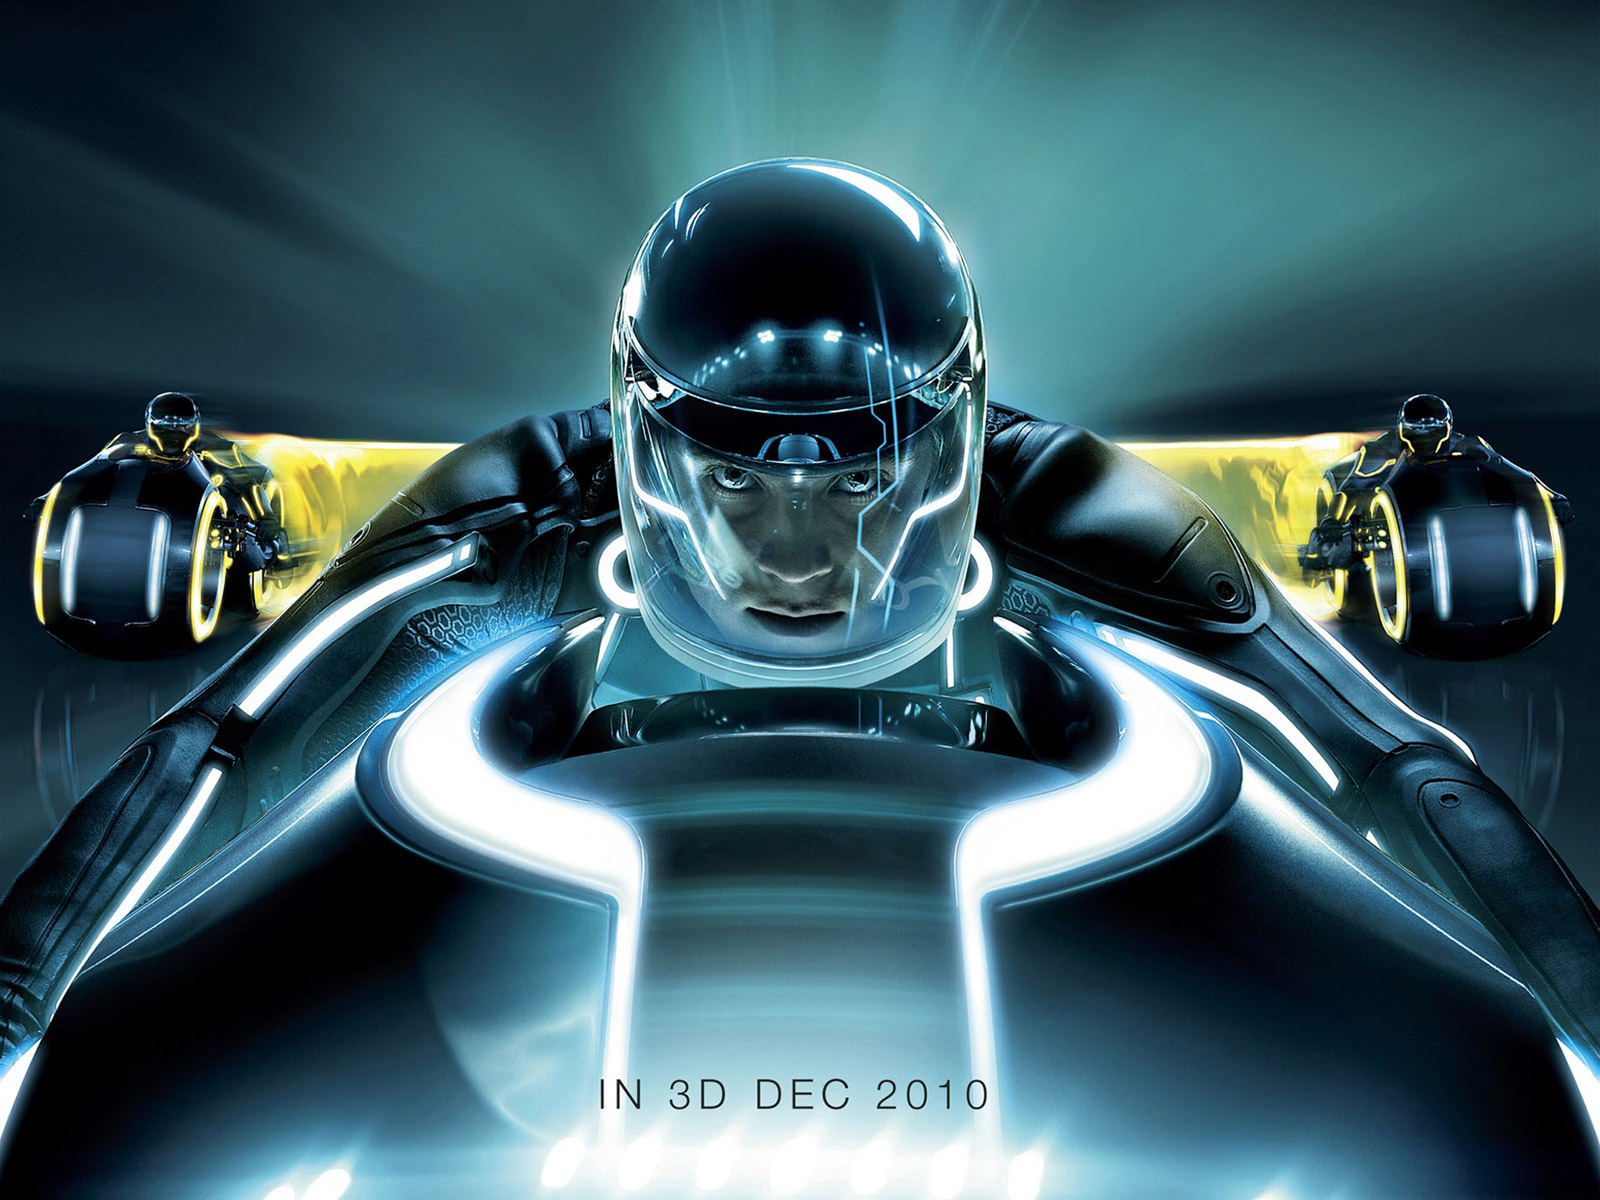 Download full size TRON: Legacy wallpaper / Movies / 1600x1200